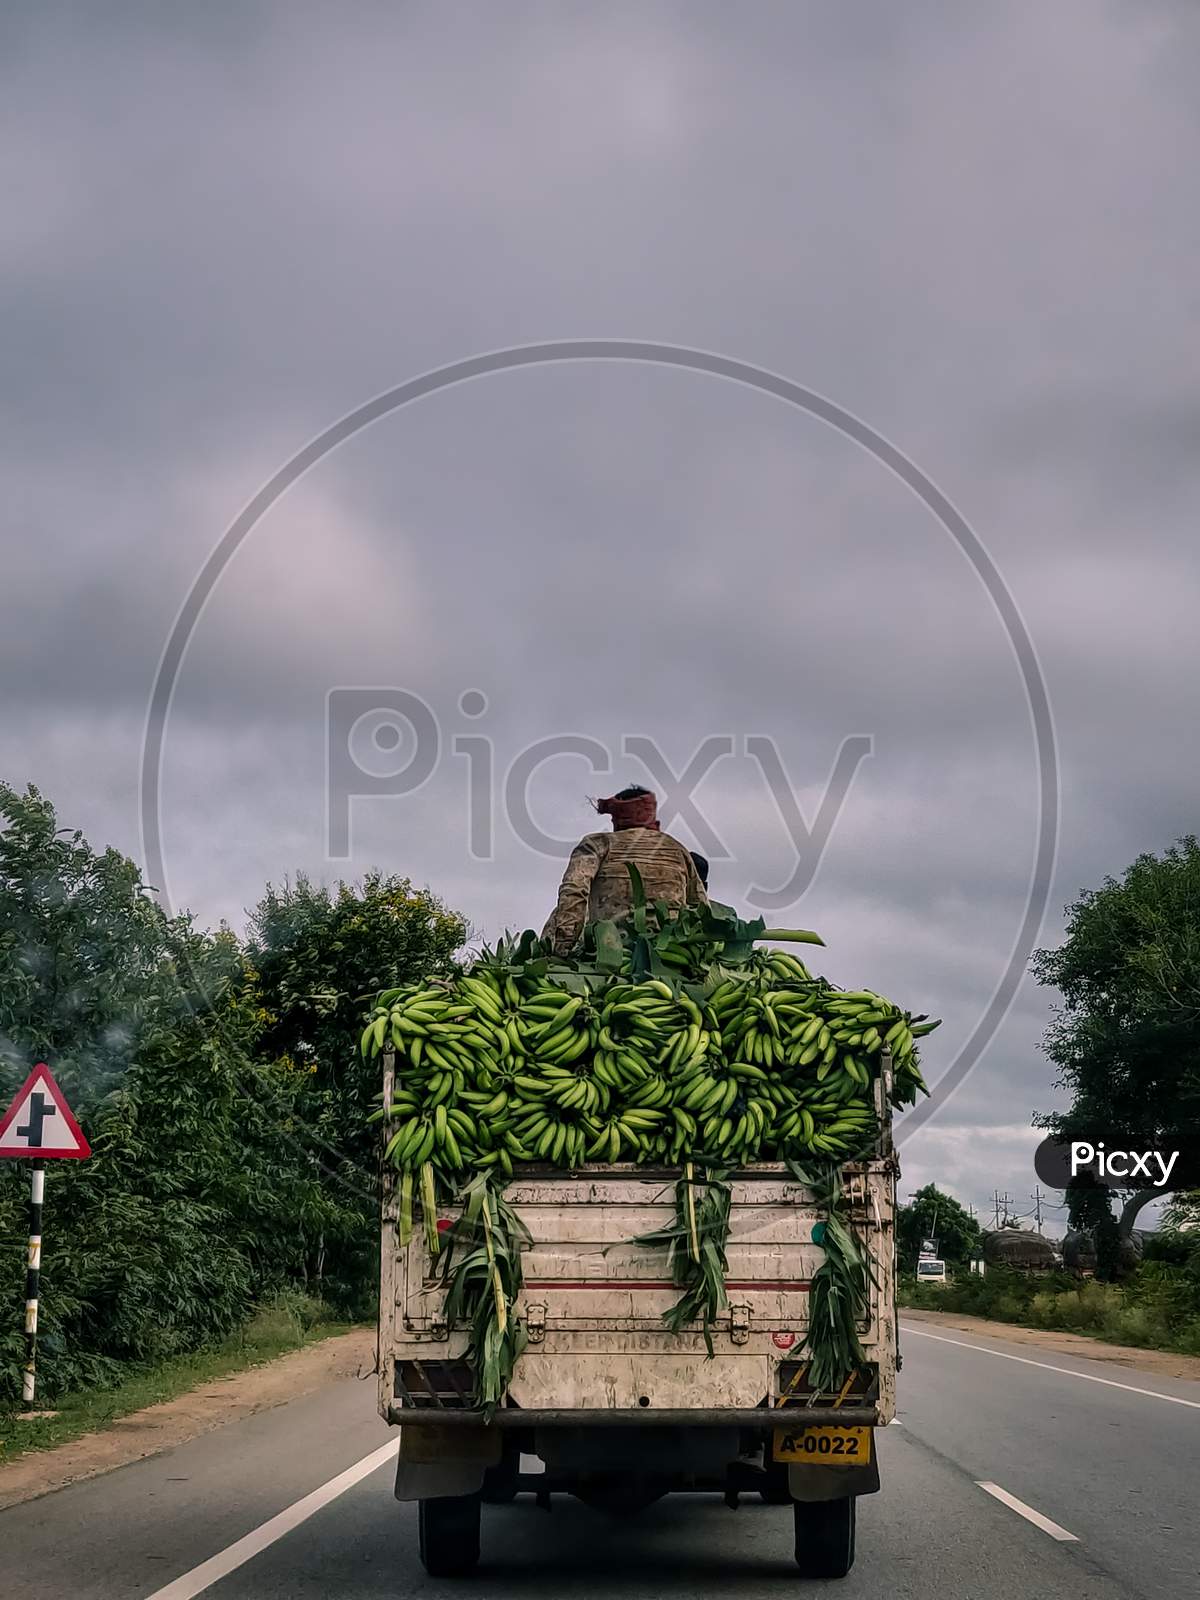 A Worker Sat on Banana Load in a Truck